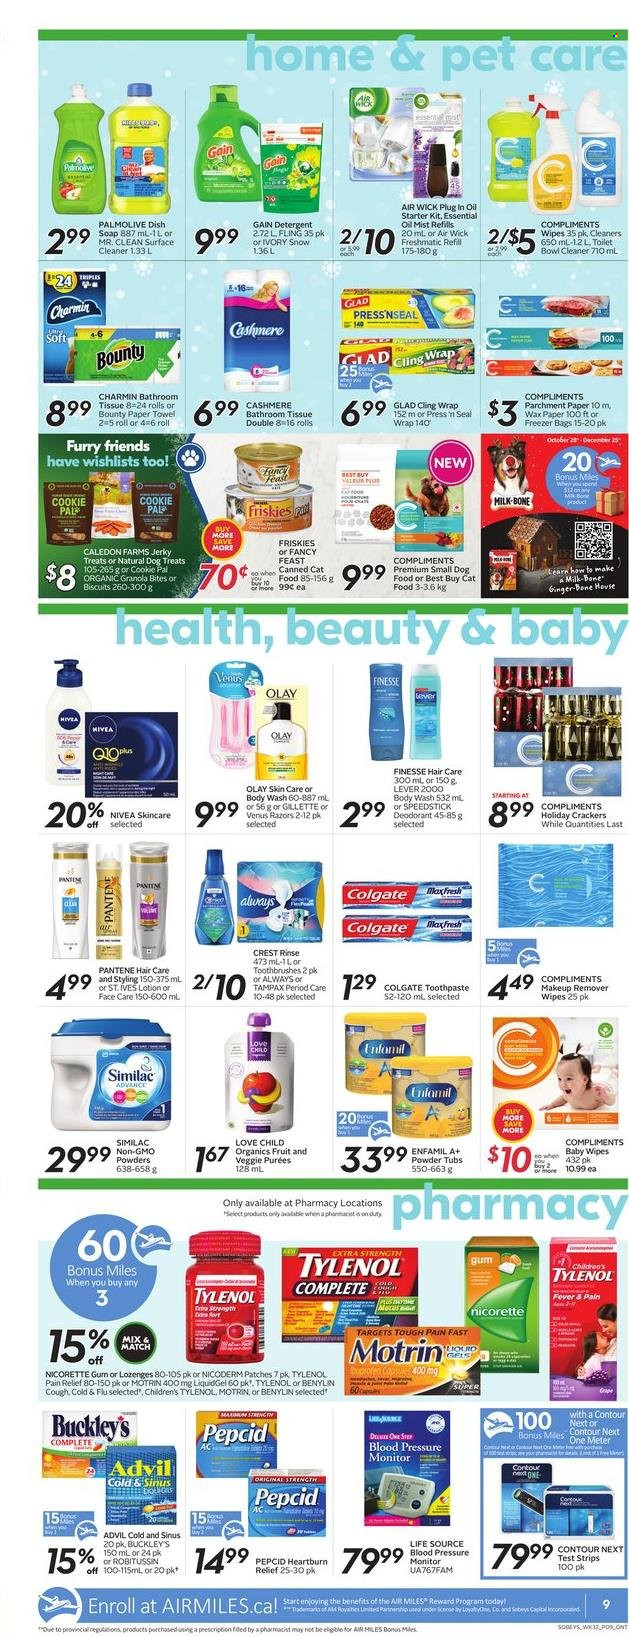 thumbnail - Sobeys Flyer - December 02, 2021 - December 08, 2021 - Sales products - jerky, milk, Bounty, crackers, biscuit, Enfamil, Similac, wipes, baby wipes, bath tissue, paper towels, Charmin, Gain, surface cleaner, cleaner, body wash, Palmolive, soap, toothpaste, Crest, Olay, body lotion, anti-perspirant, Venus, makeup remover, contour, animal food, cat food, dog food, Fancy Feast, Friskies, pain relief, Cold & Flu, NicoDerm, Nicorette, Tylenol, Pepcid, Advil Rapid, Nicorette Gum, Benylin, Motrin, pressure monitor, detergent, Colgate, Gillette, granola, Robitussin, Tampax, Pantene, Nivea, deodorant. Page 9.